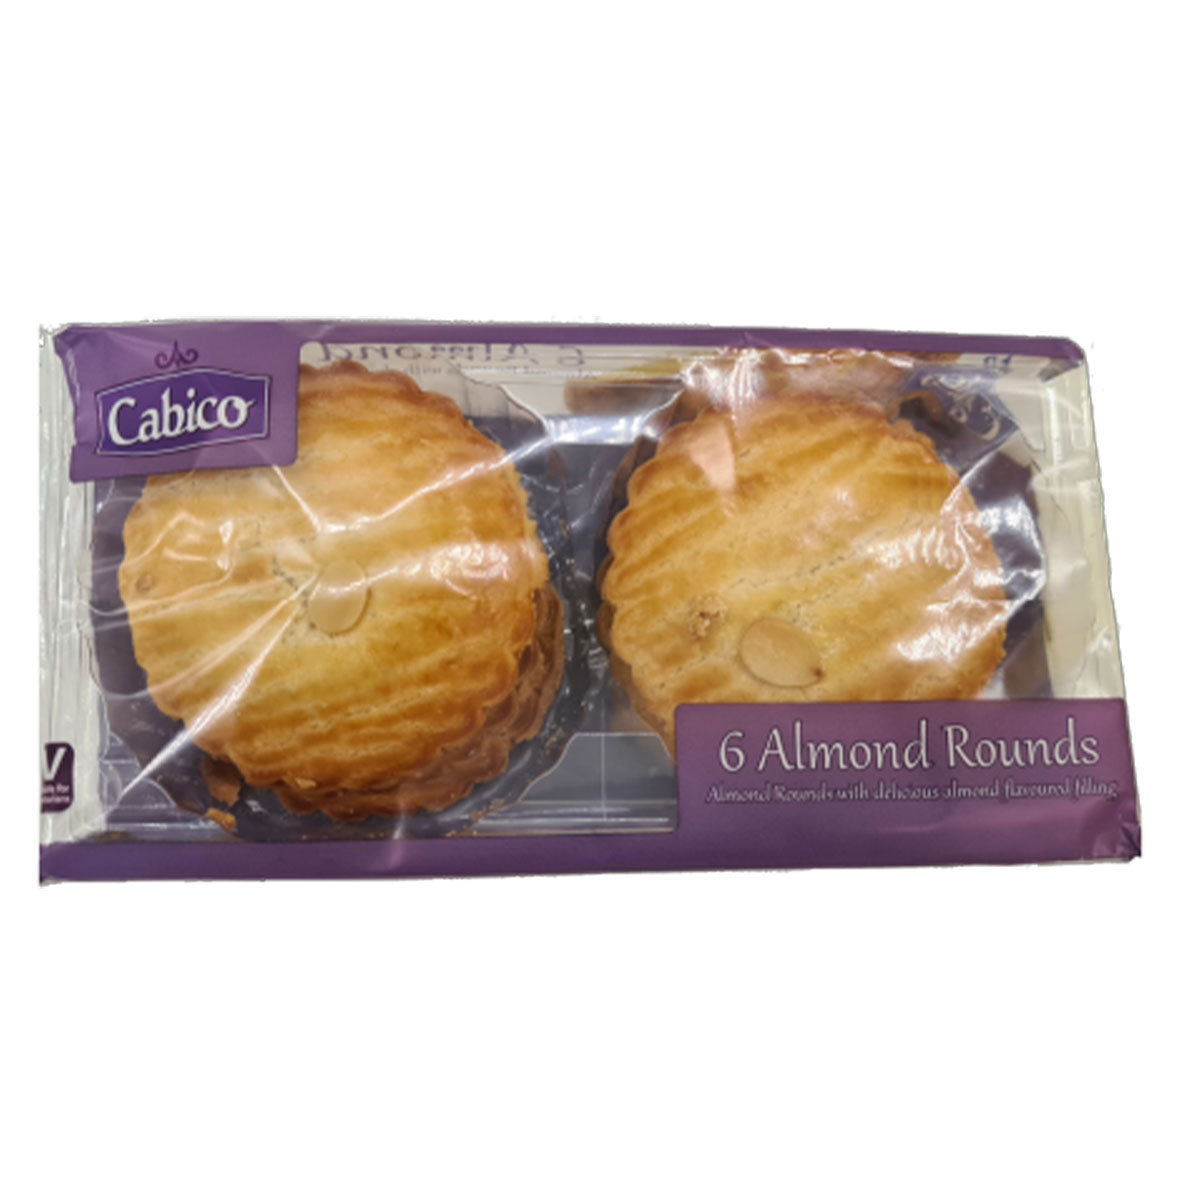 Cabico - Almond Rounds - 264g - Continental Food Store